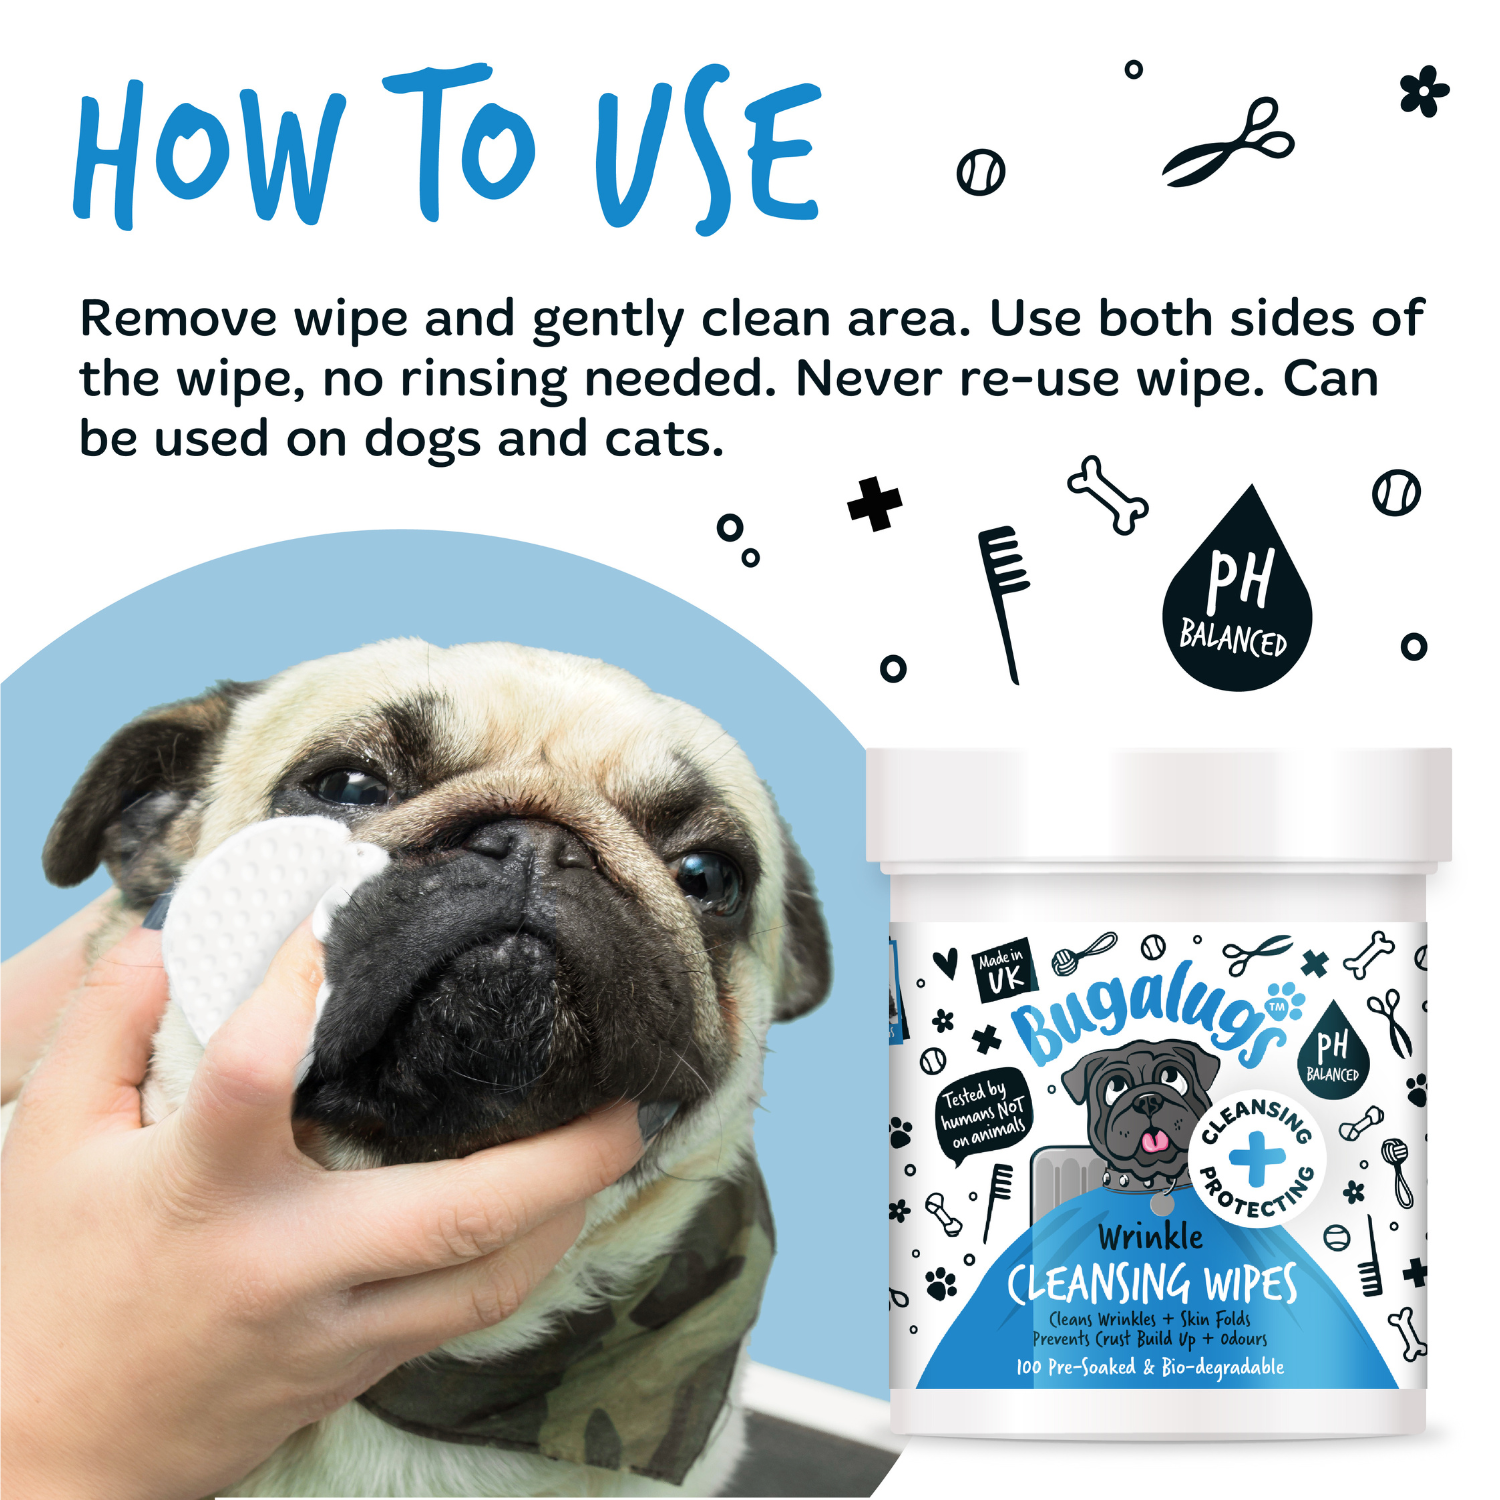 Bugalugs Wrinkle Cleansing Wipes - How to use